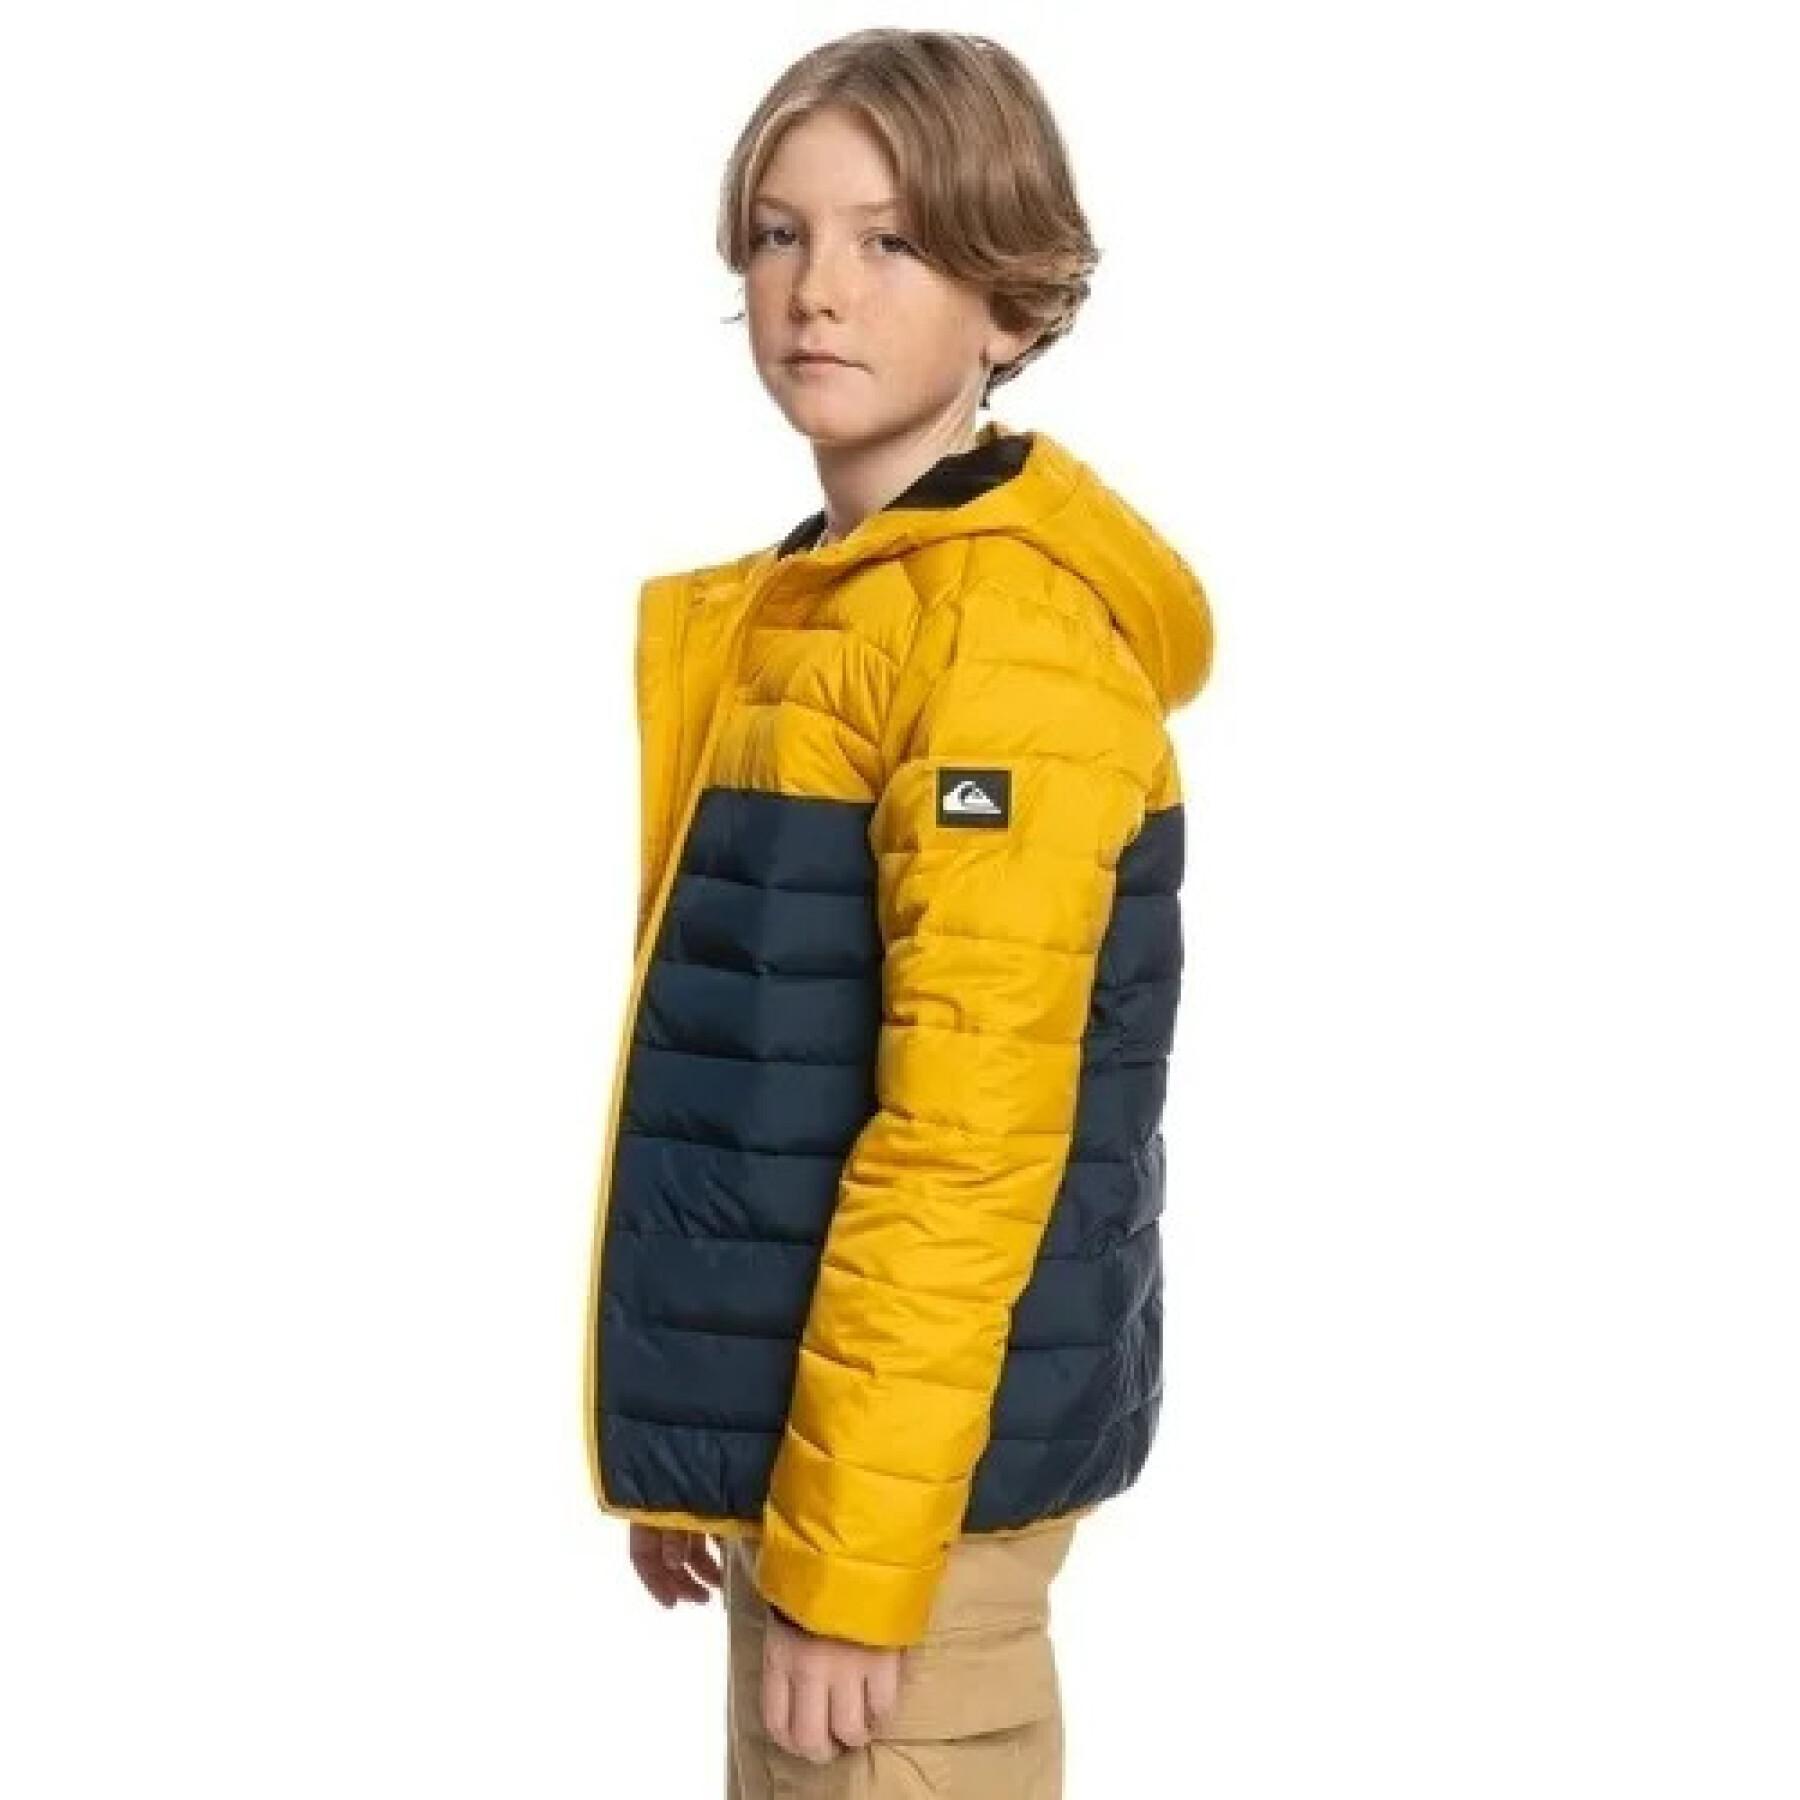 Kid's Puffer Jacket Quiksilver Scaly Mix